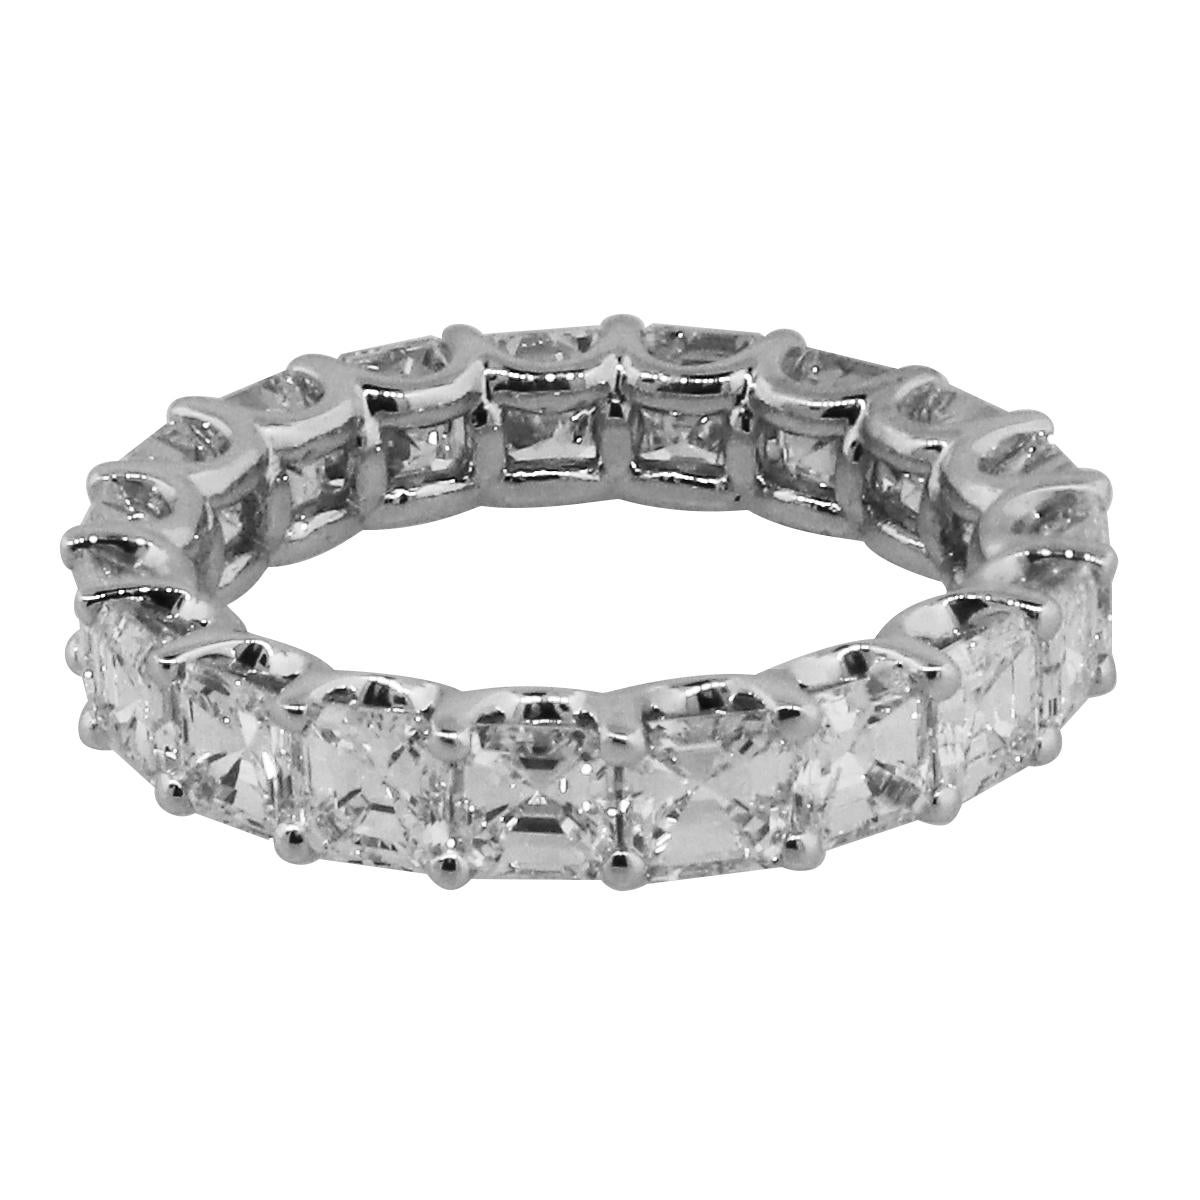 Material: 18k White Gold
Diamond Details: Total of 19 Diamonds. Approximately 4.71ctw Asscher cut diamonds. Diamonds are G/H in color and VS in clarity
Ring Size: 6.5
Ring Measurements: 0.85″ x 0.16″ x 0.85″
Total Weight: 3.7g (2.4dwt)
SKU: A30312787